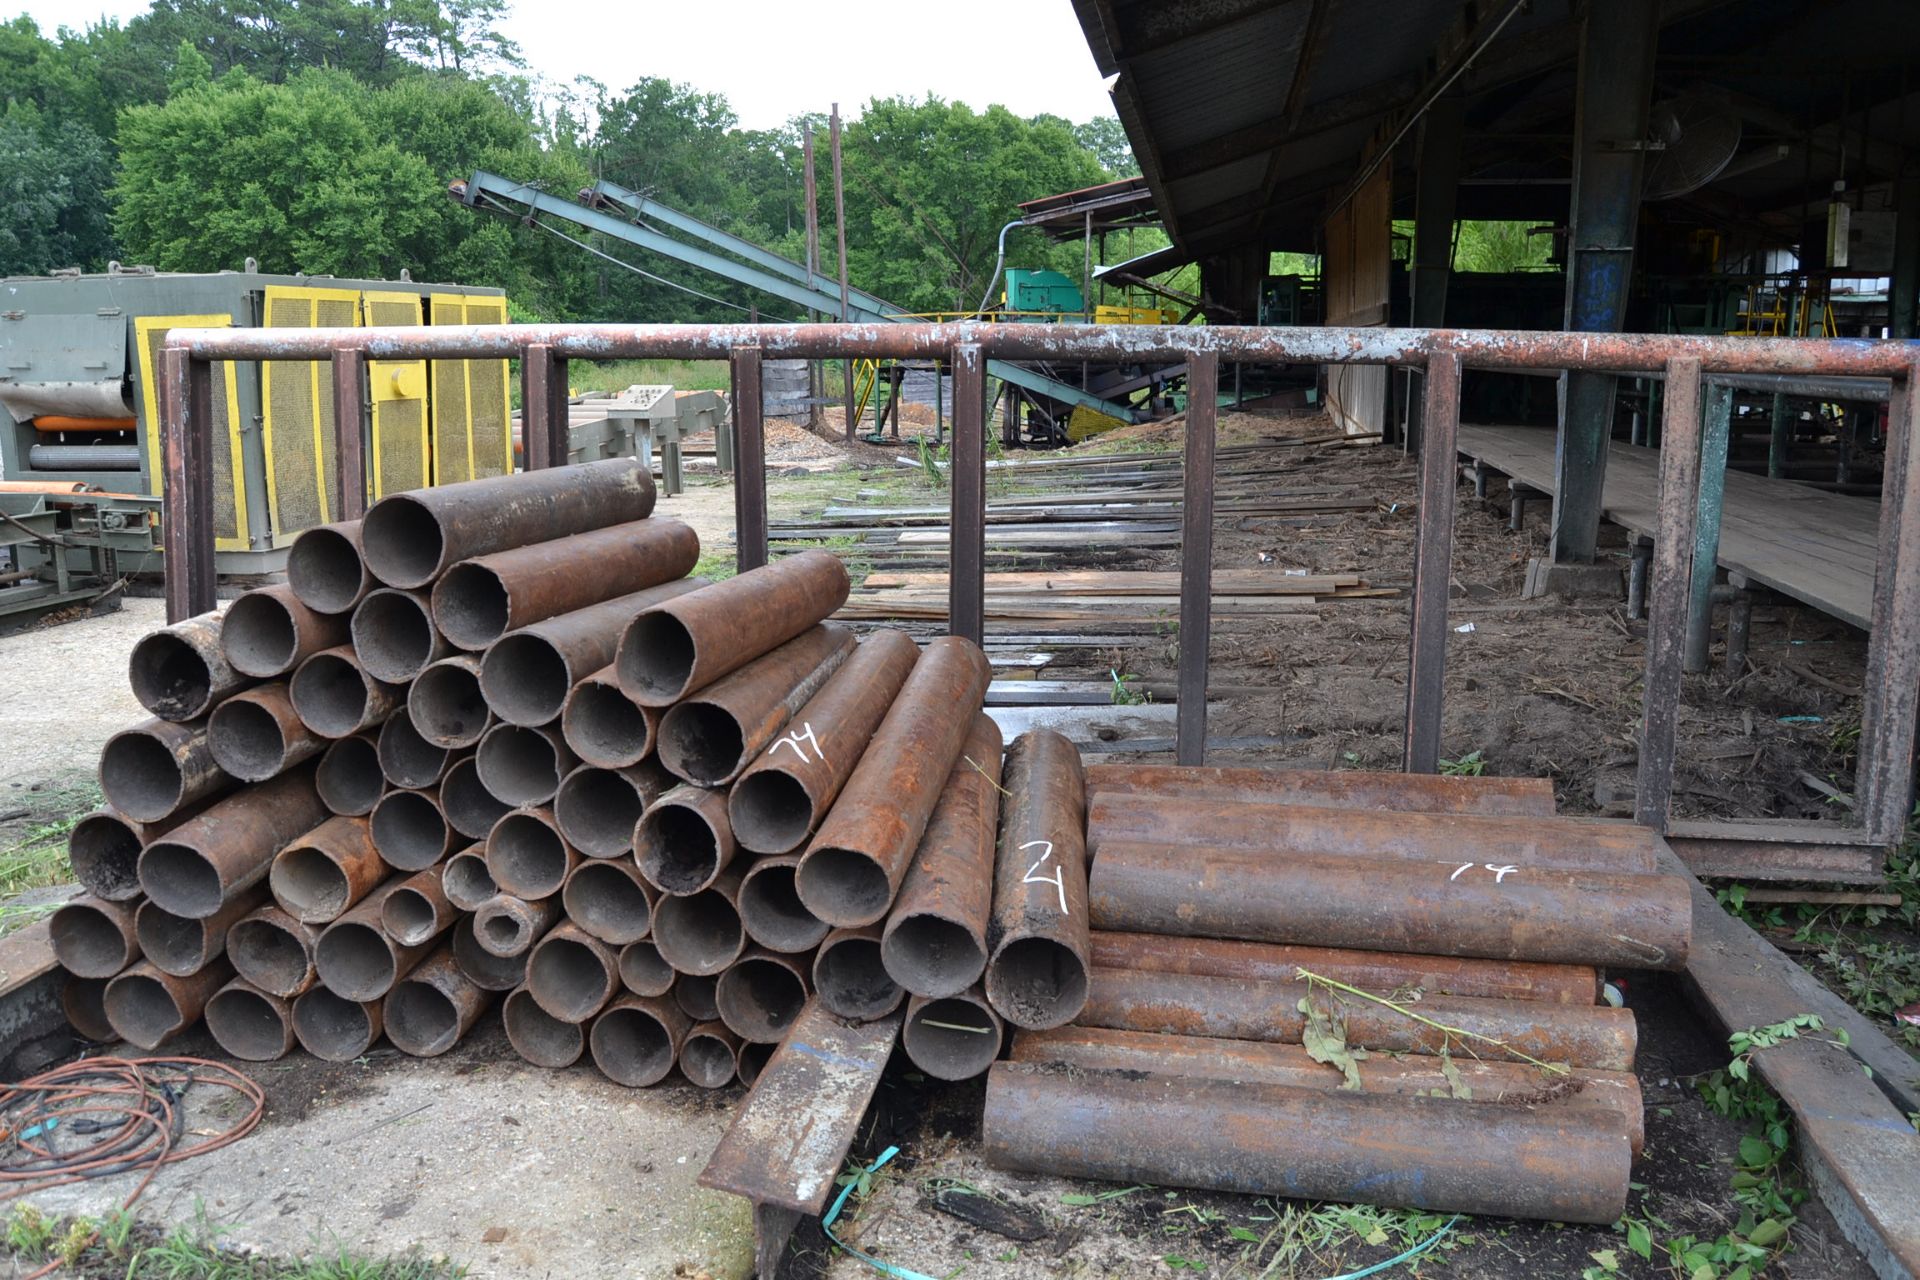 LOT OF STEEL PIPES